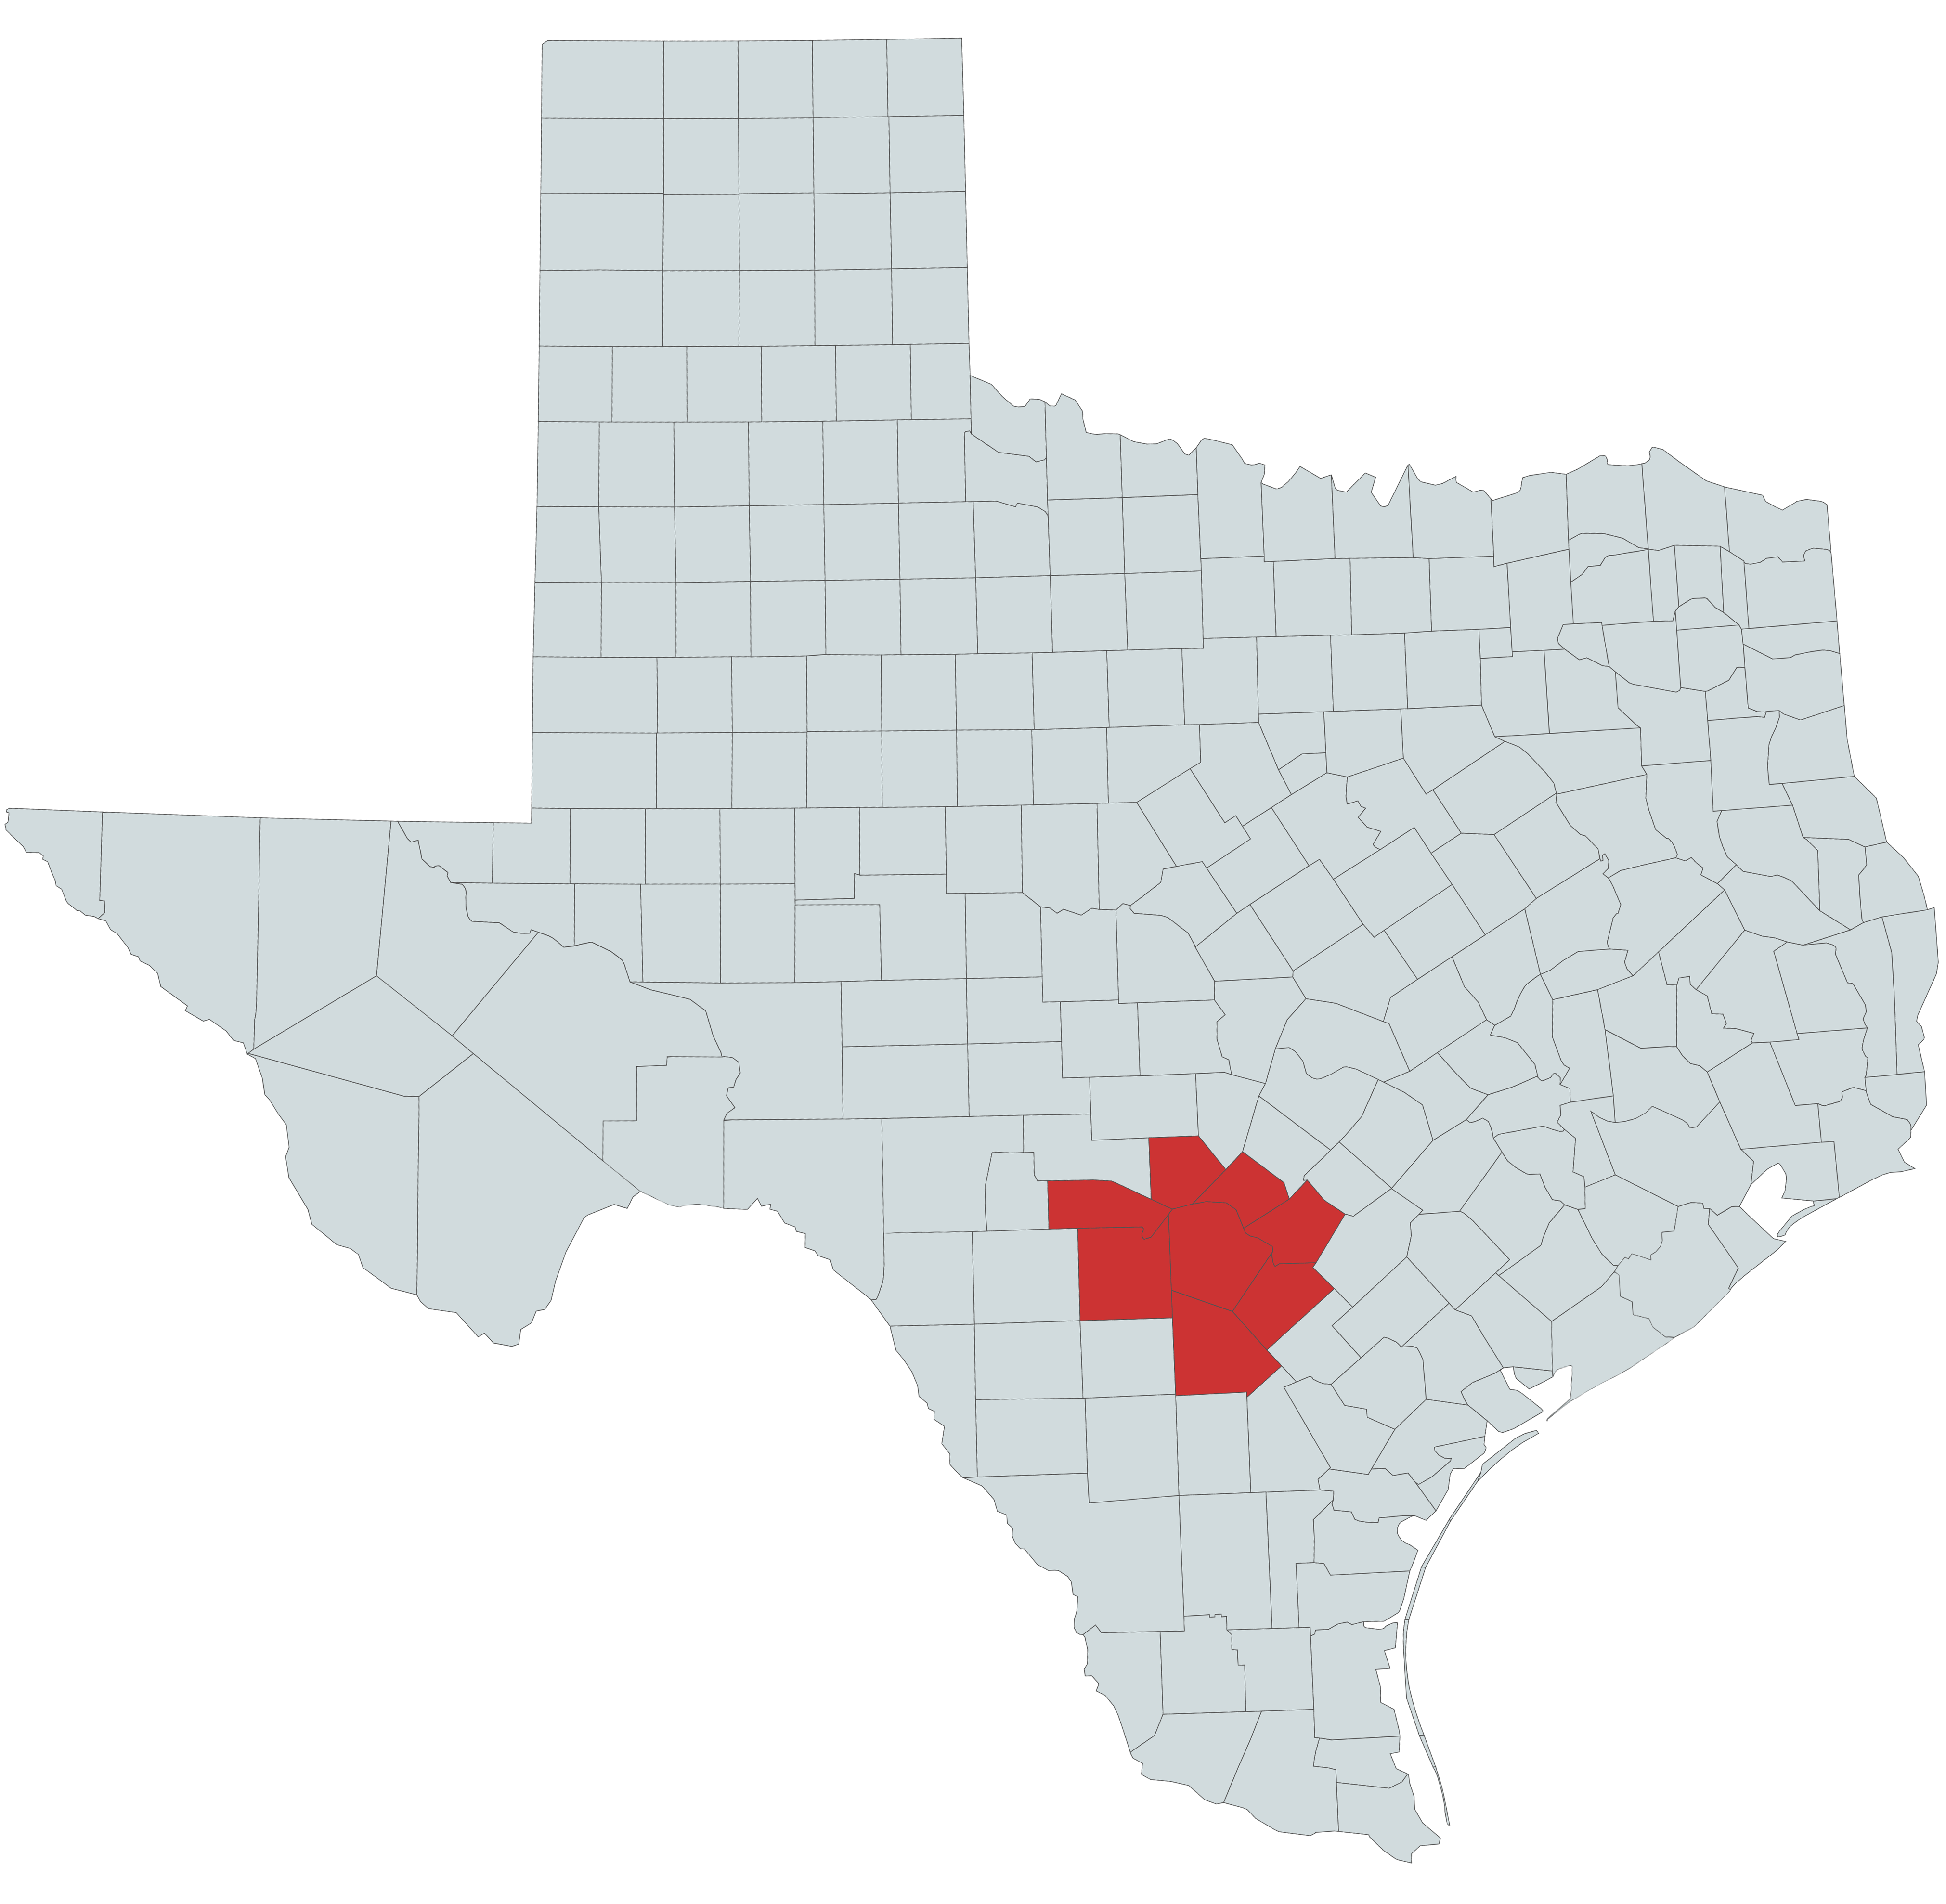 Map of Texas counties highlighting Mission Gas service areas.